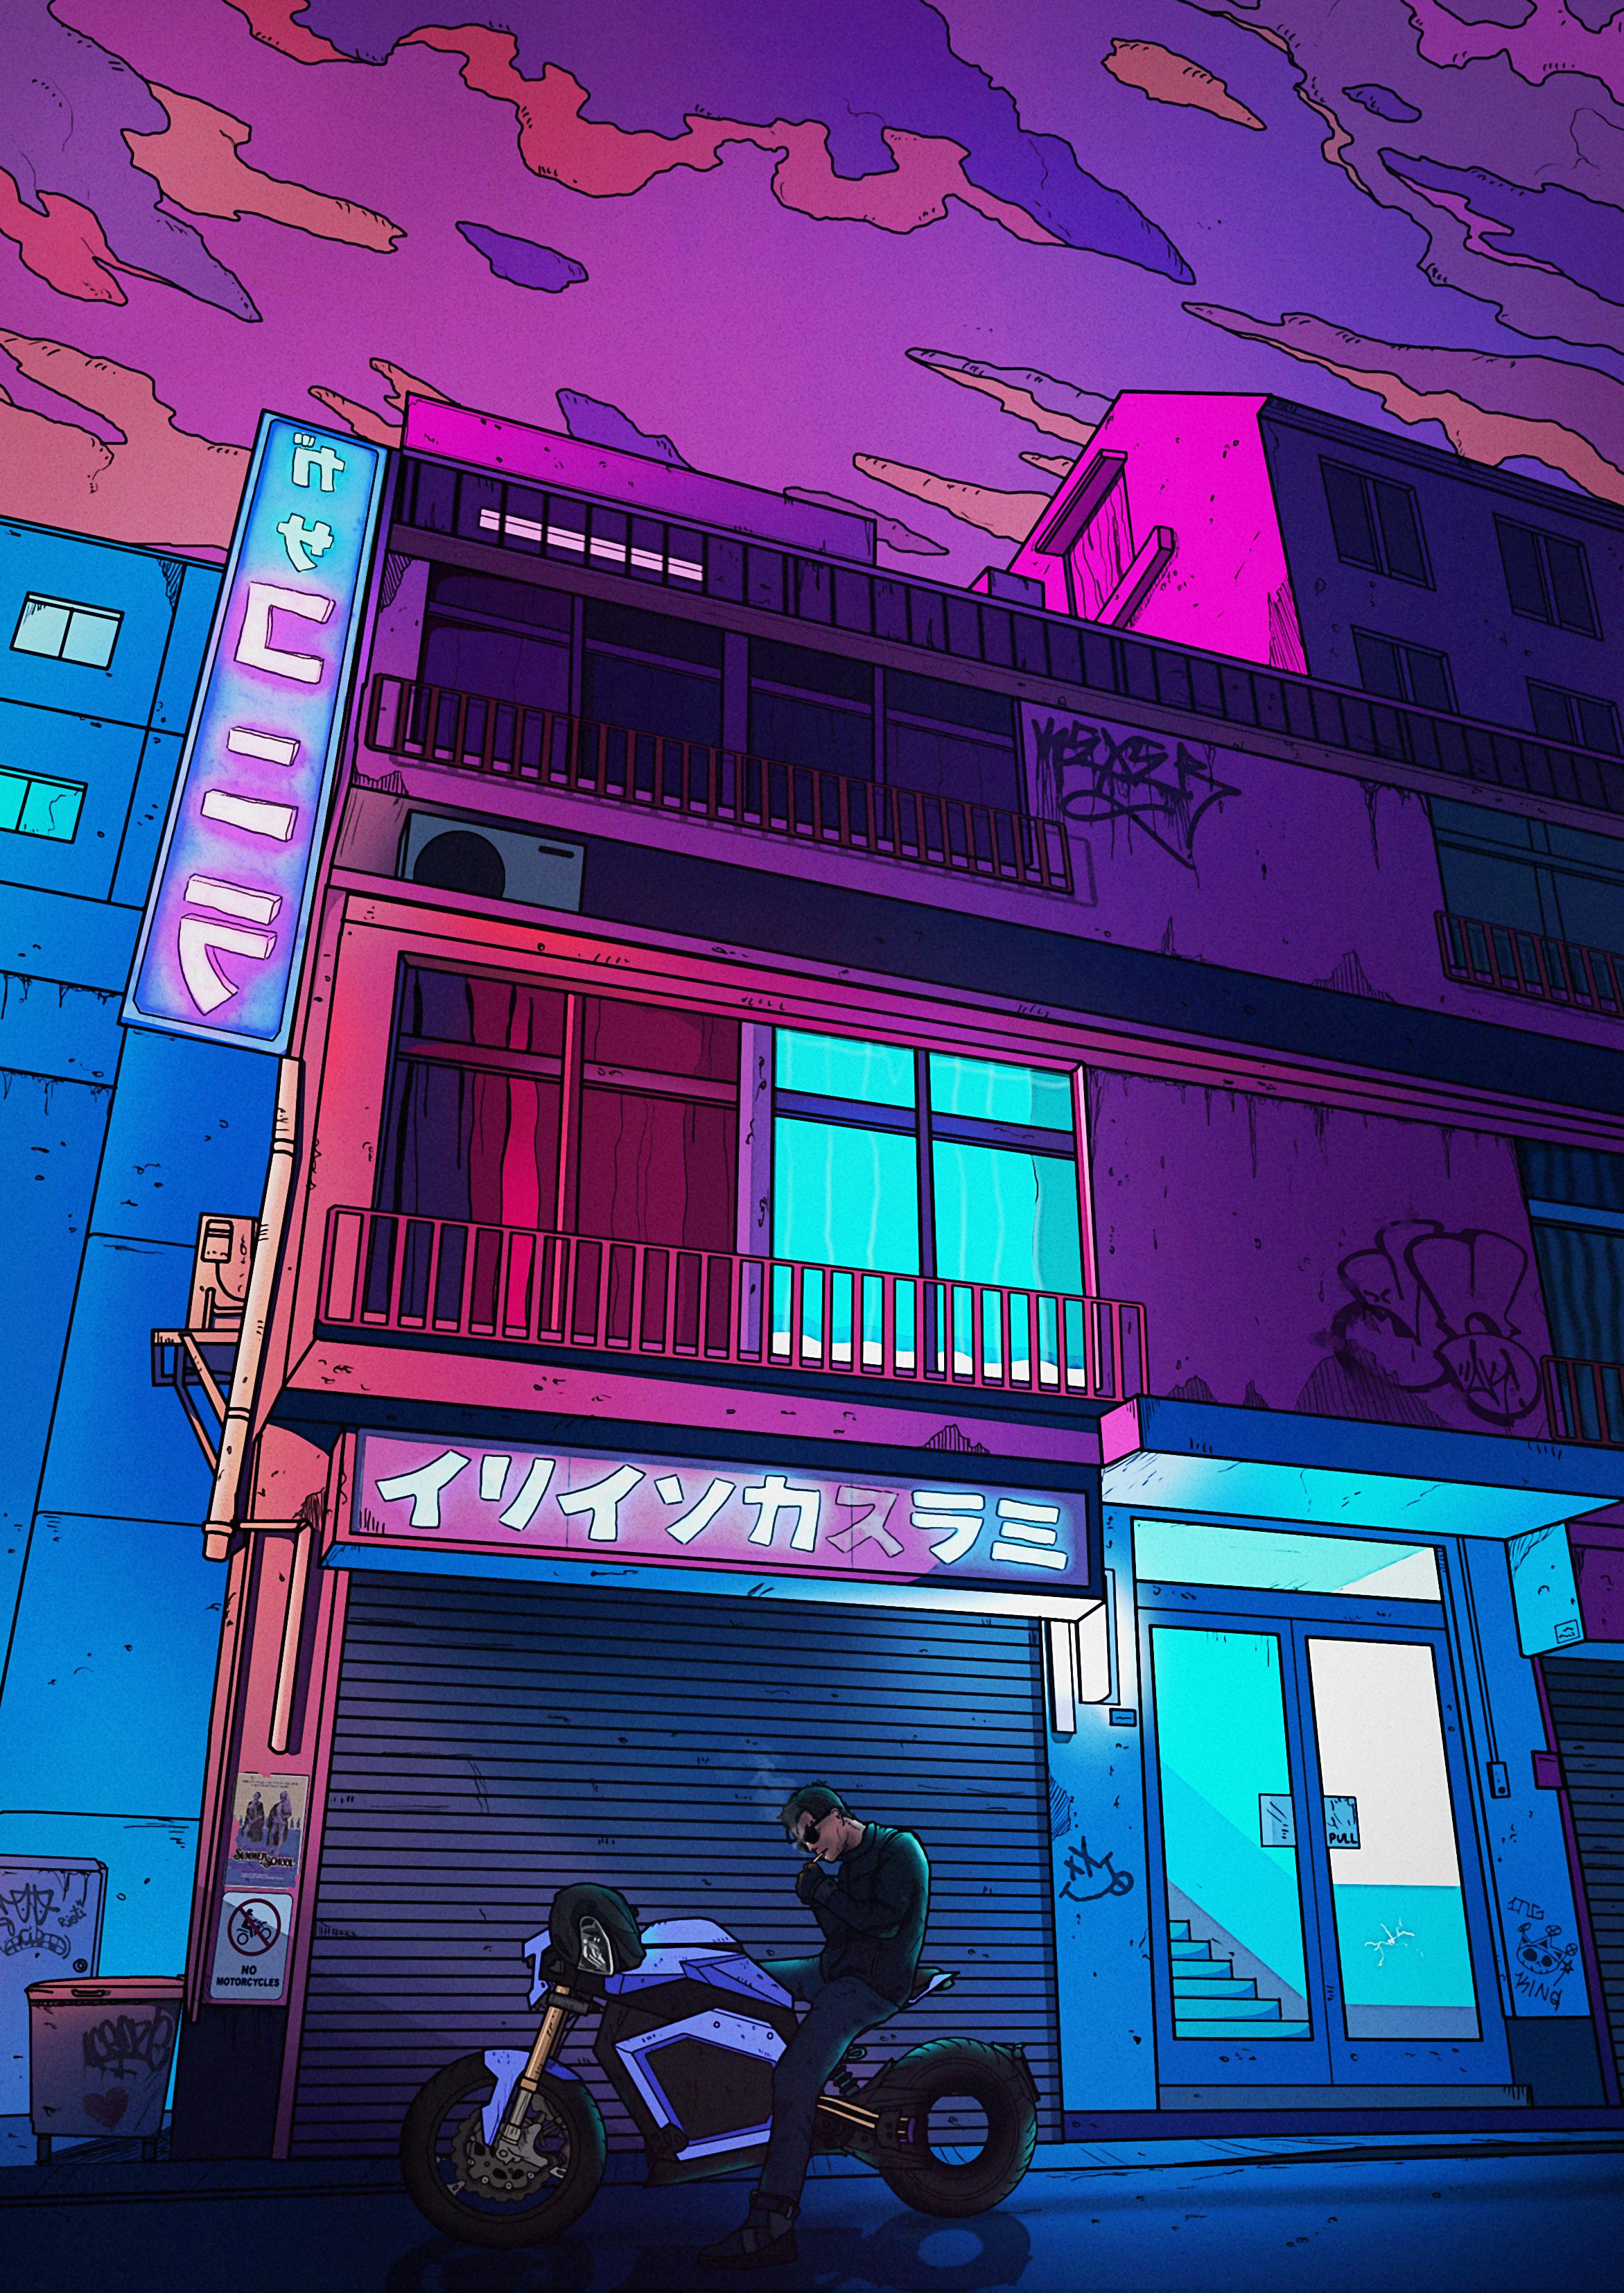 A cyberpunk inspired illustration of a man on a motorcycle in front of a neon lit building. - Cyberpunk 2077